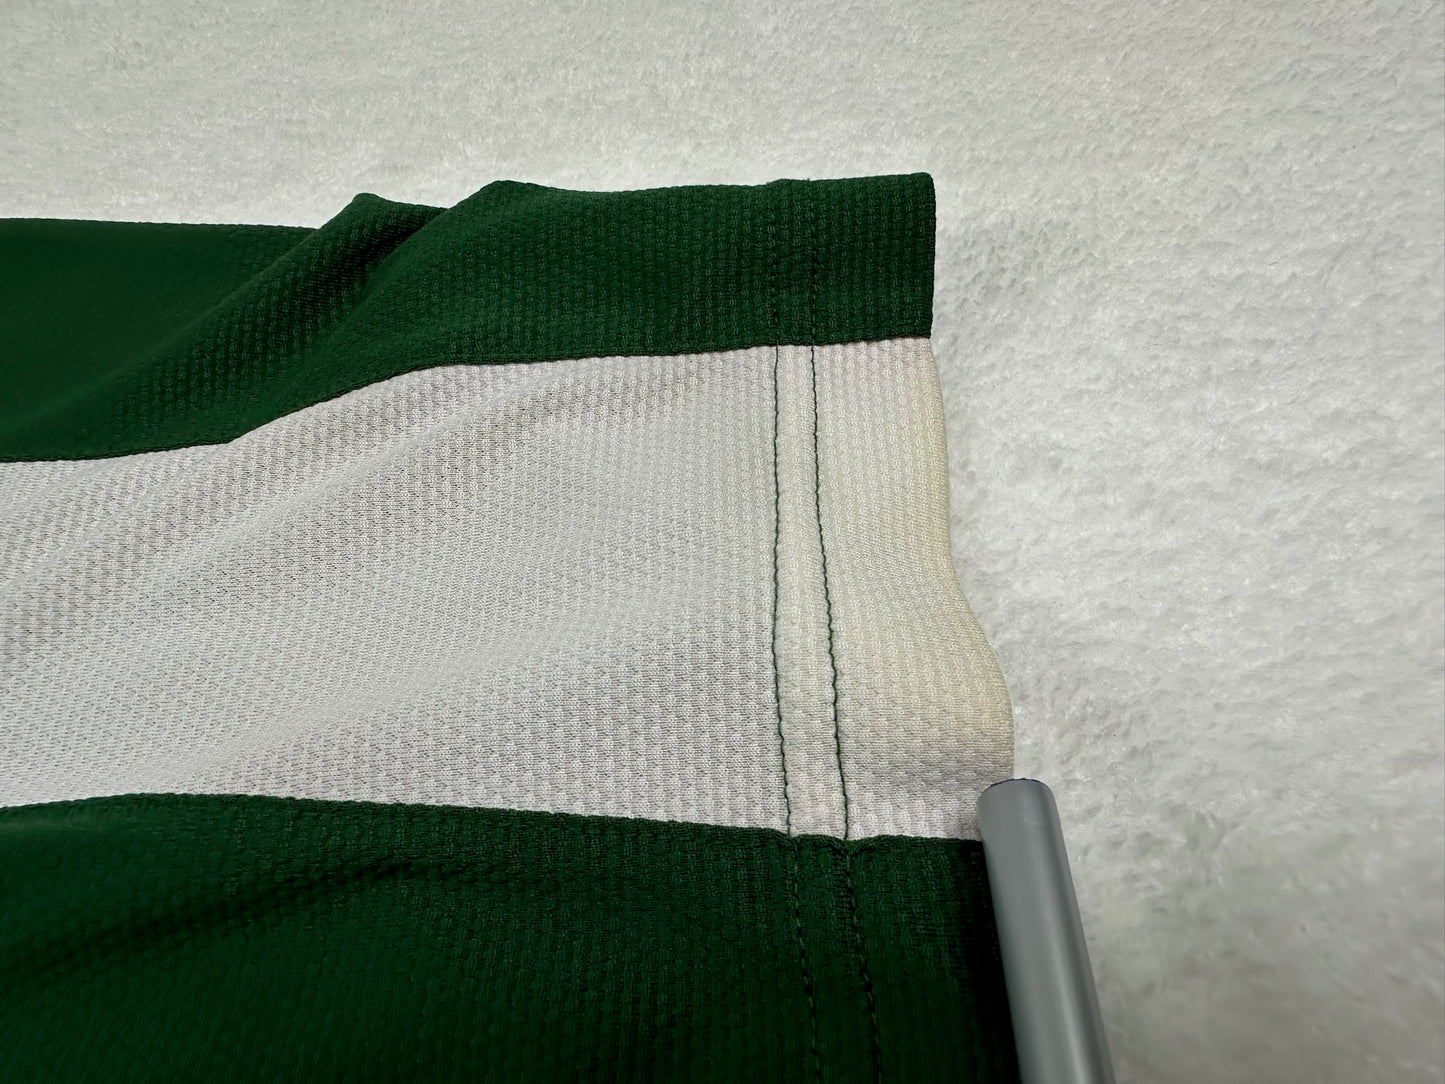 Michigan State Dry-Fit Polo